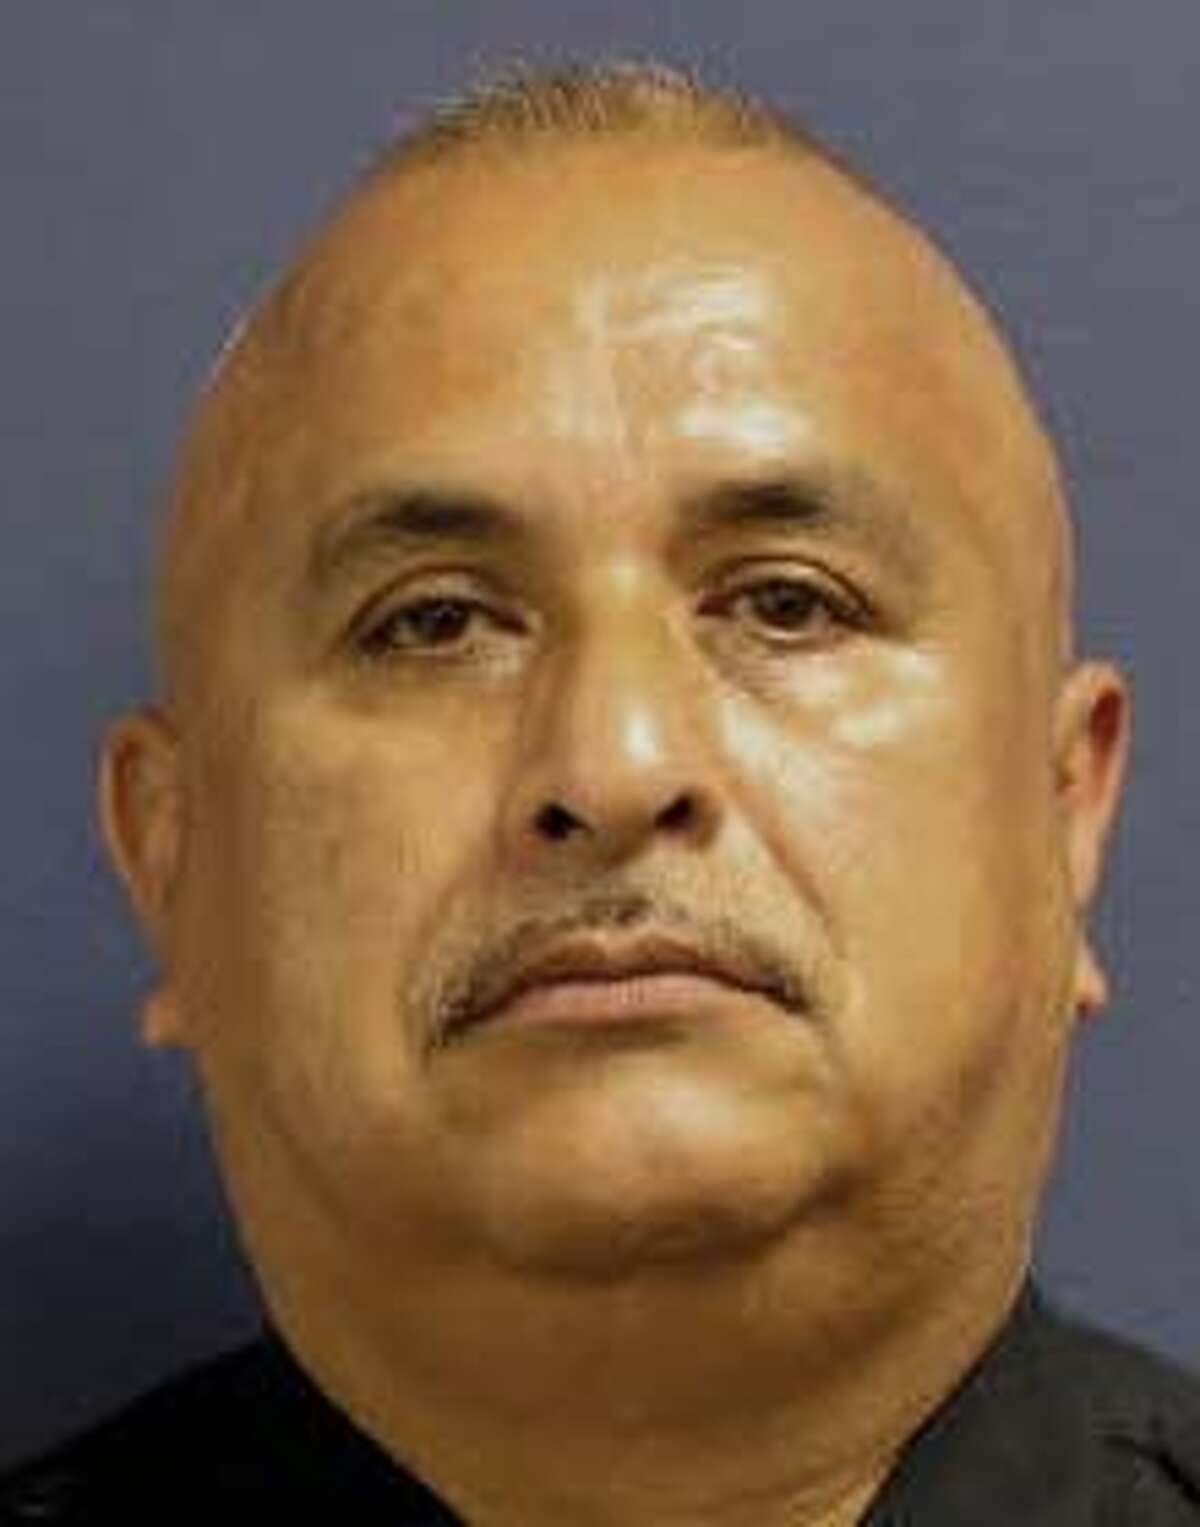 Former Houston police officer Juan Carrillo and his wife, Rosa Carrillo, were arrested Nov. 8, 2015, in south Texas on charges of transporting illegal immigrants. (Houston Police Department)